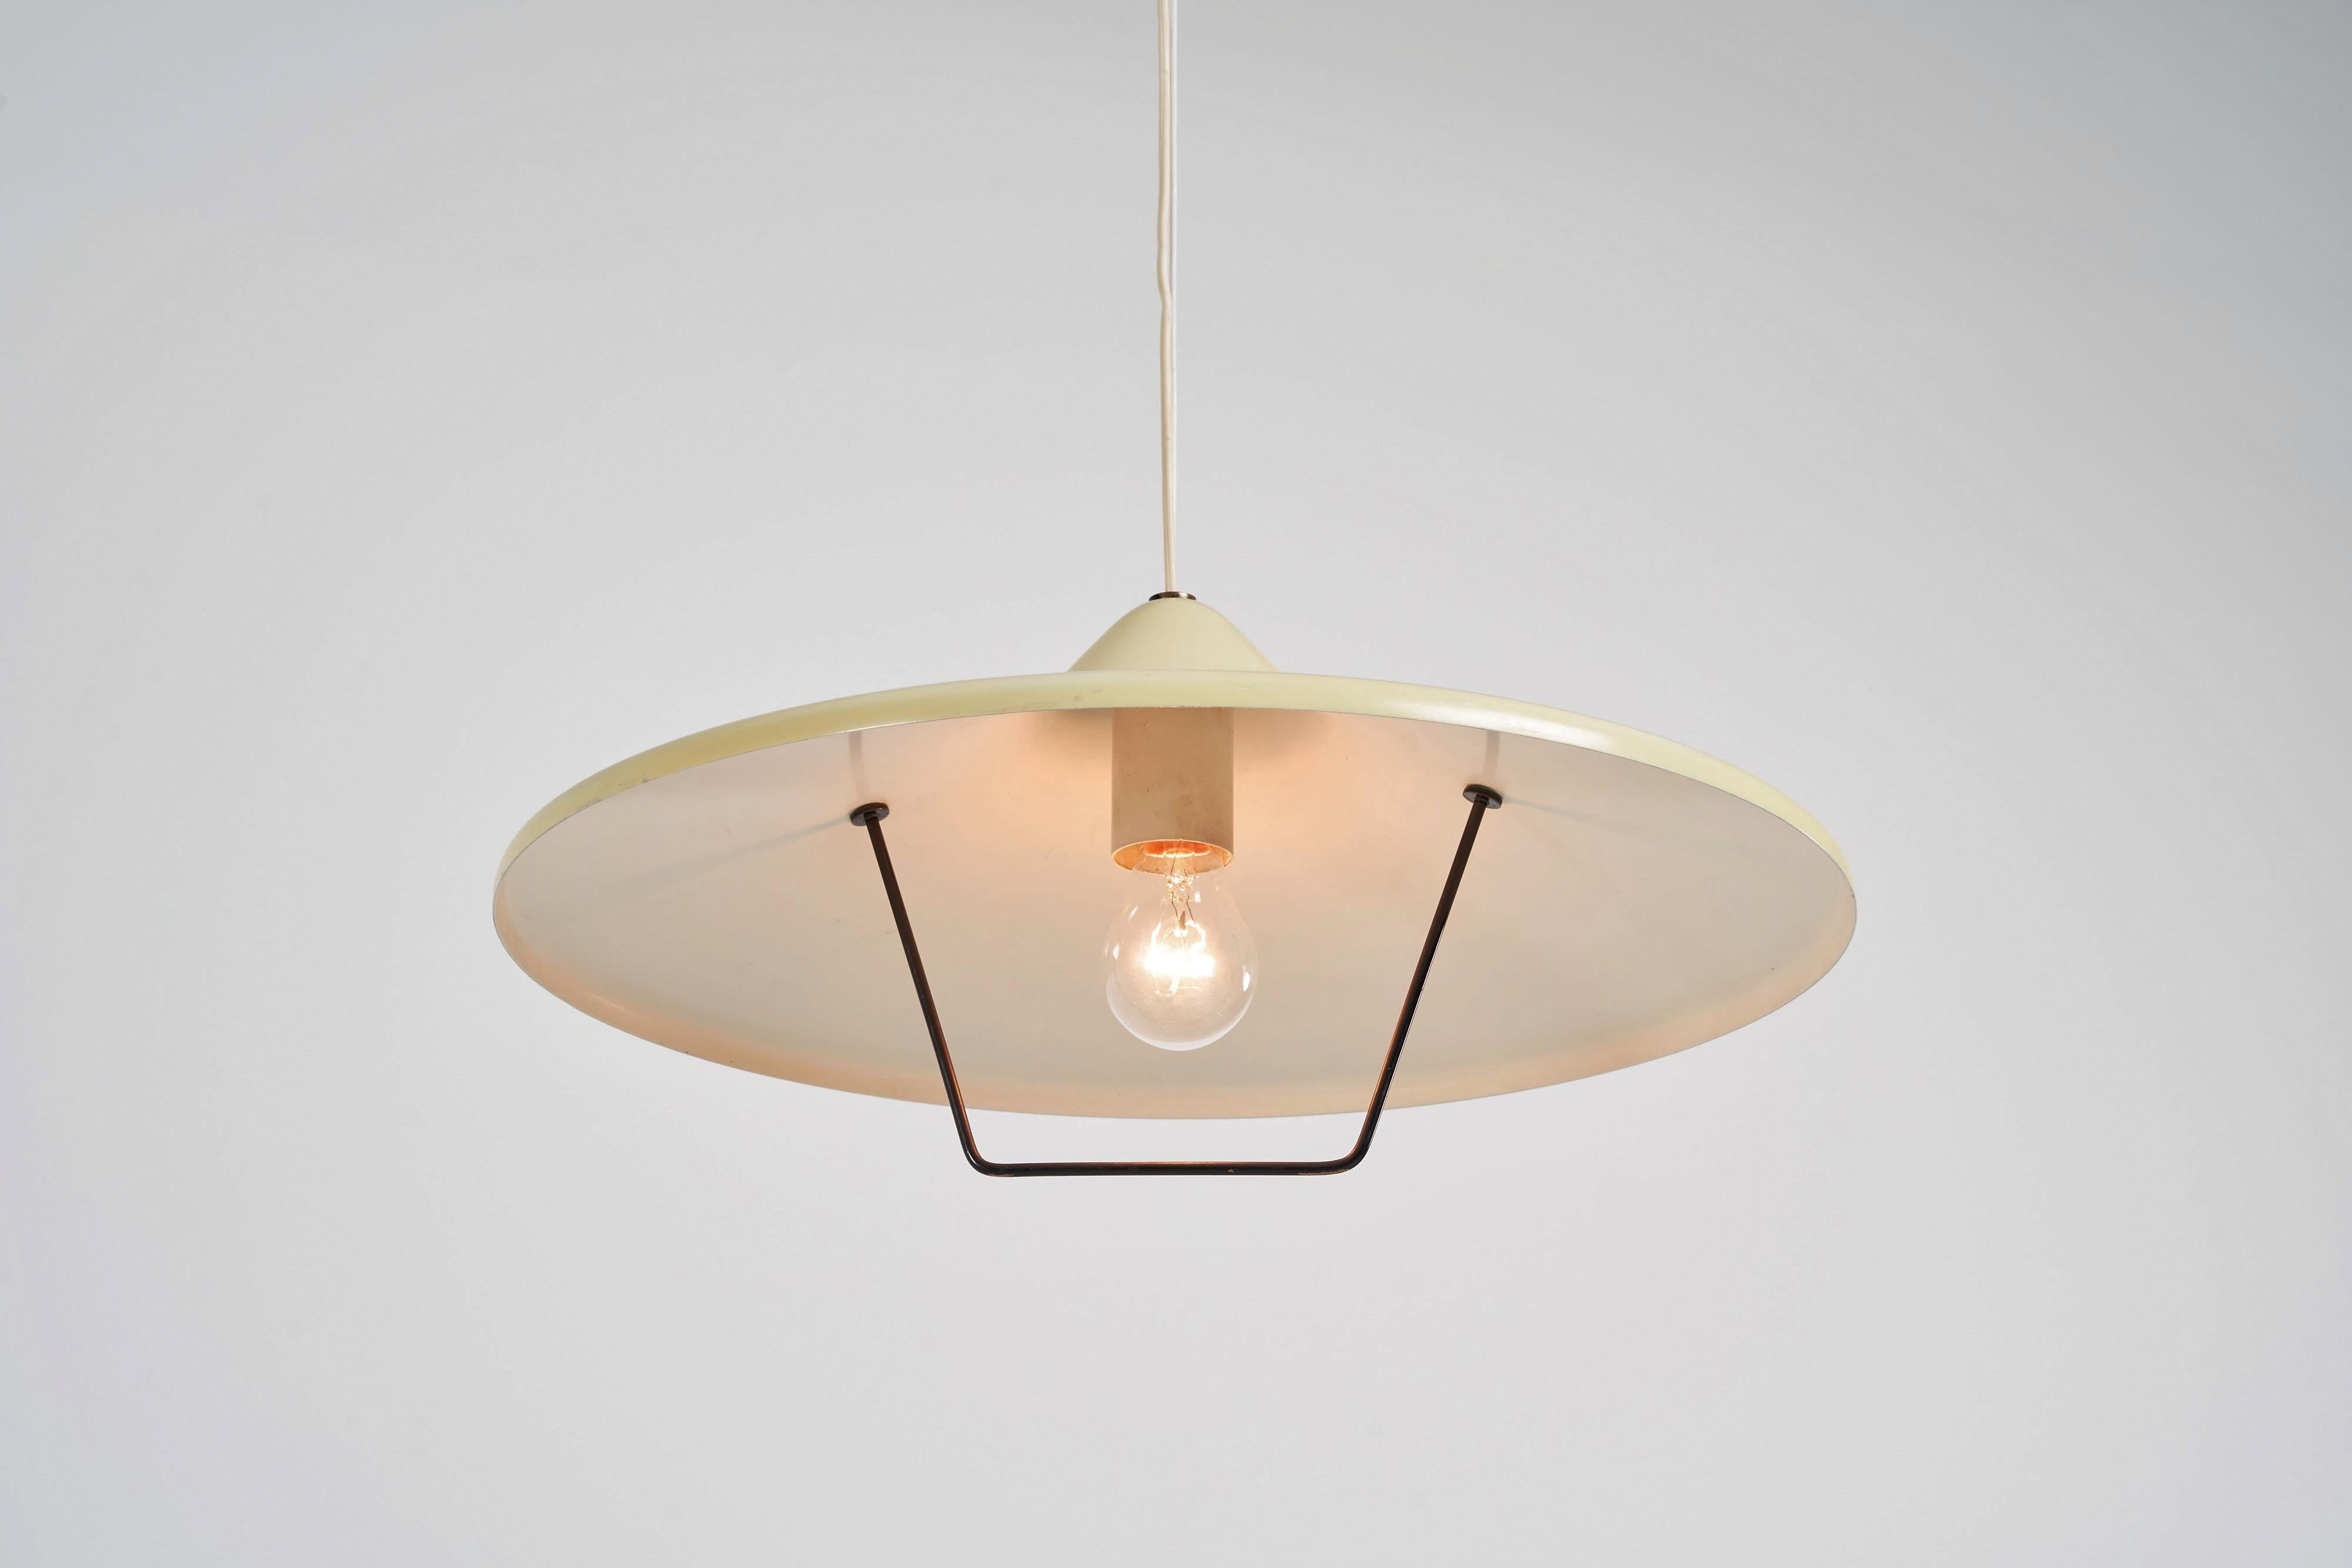 Rare counterbalance pulley pendant lamp designed and manufactured by Stilnovo, Italy 1955. This pendant lamp has the ability to easily change height and can serve more purposes on 1 place. Due to an ingenious pully system the lamp can be pulled down